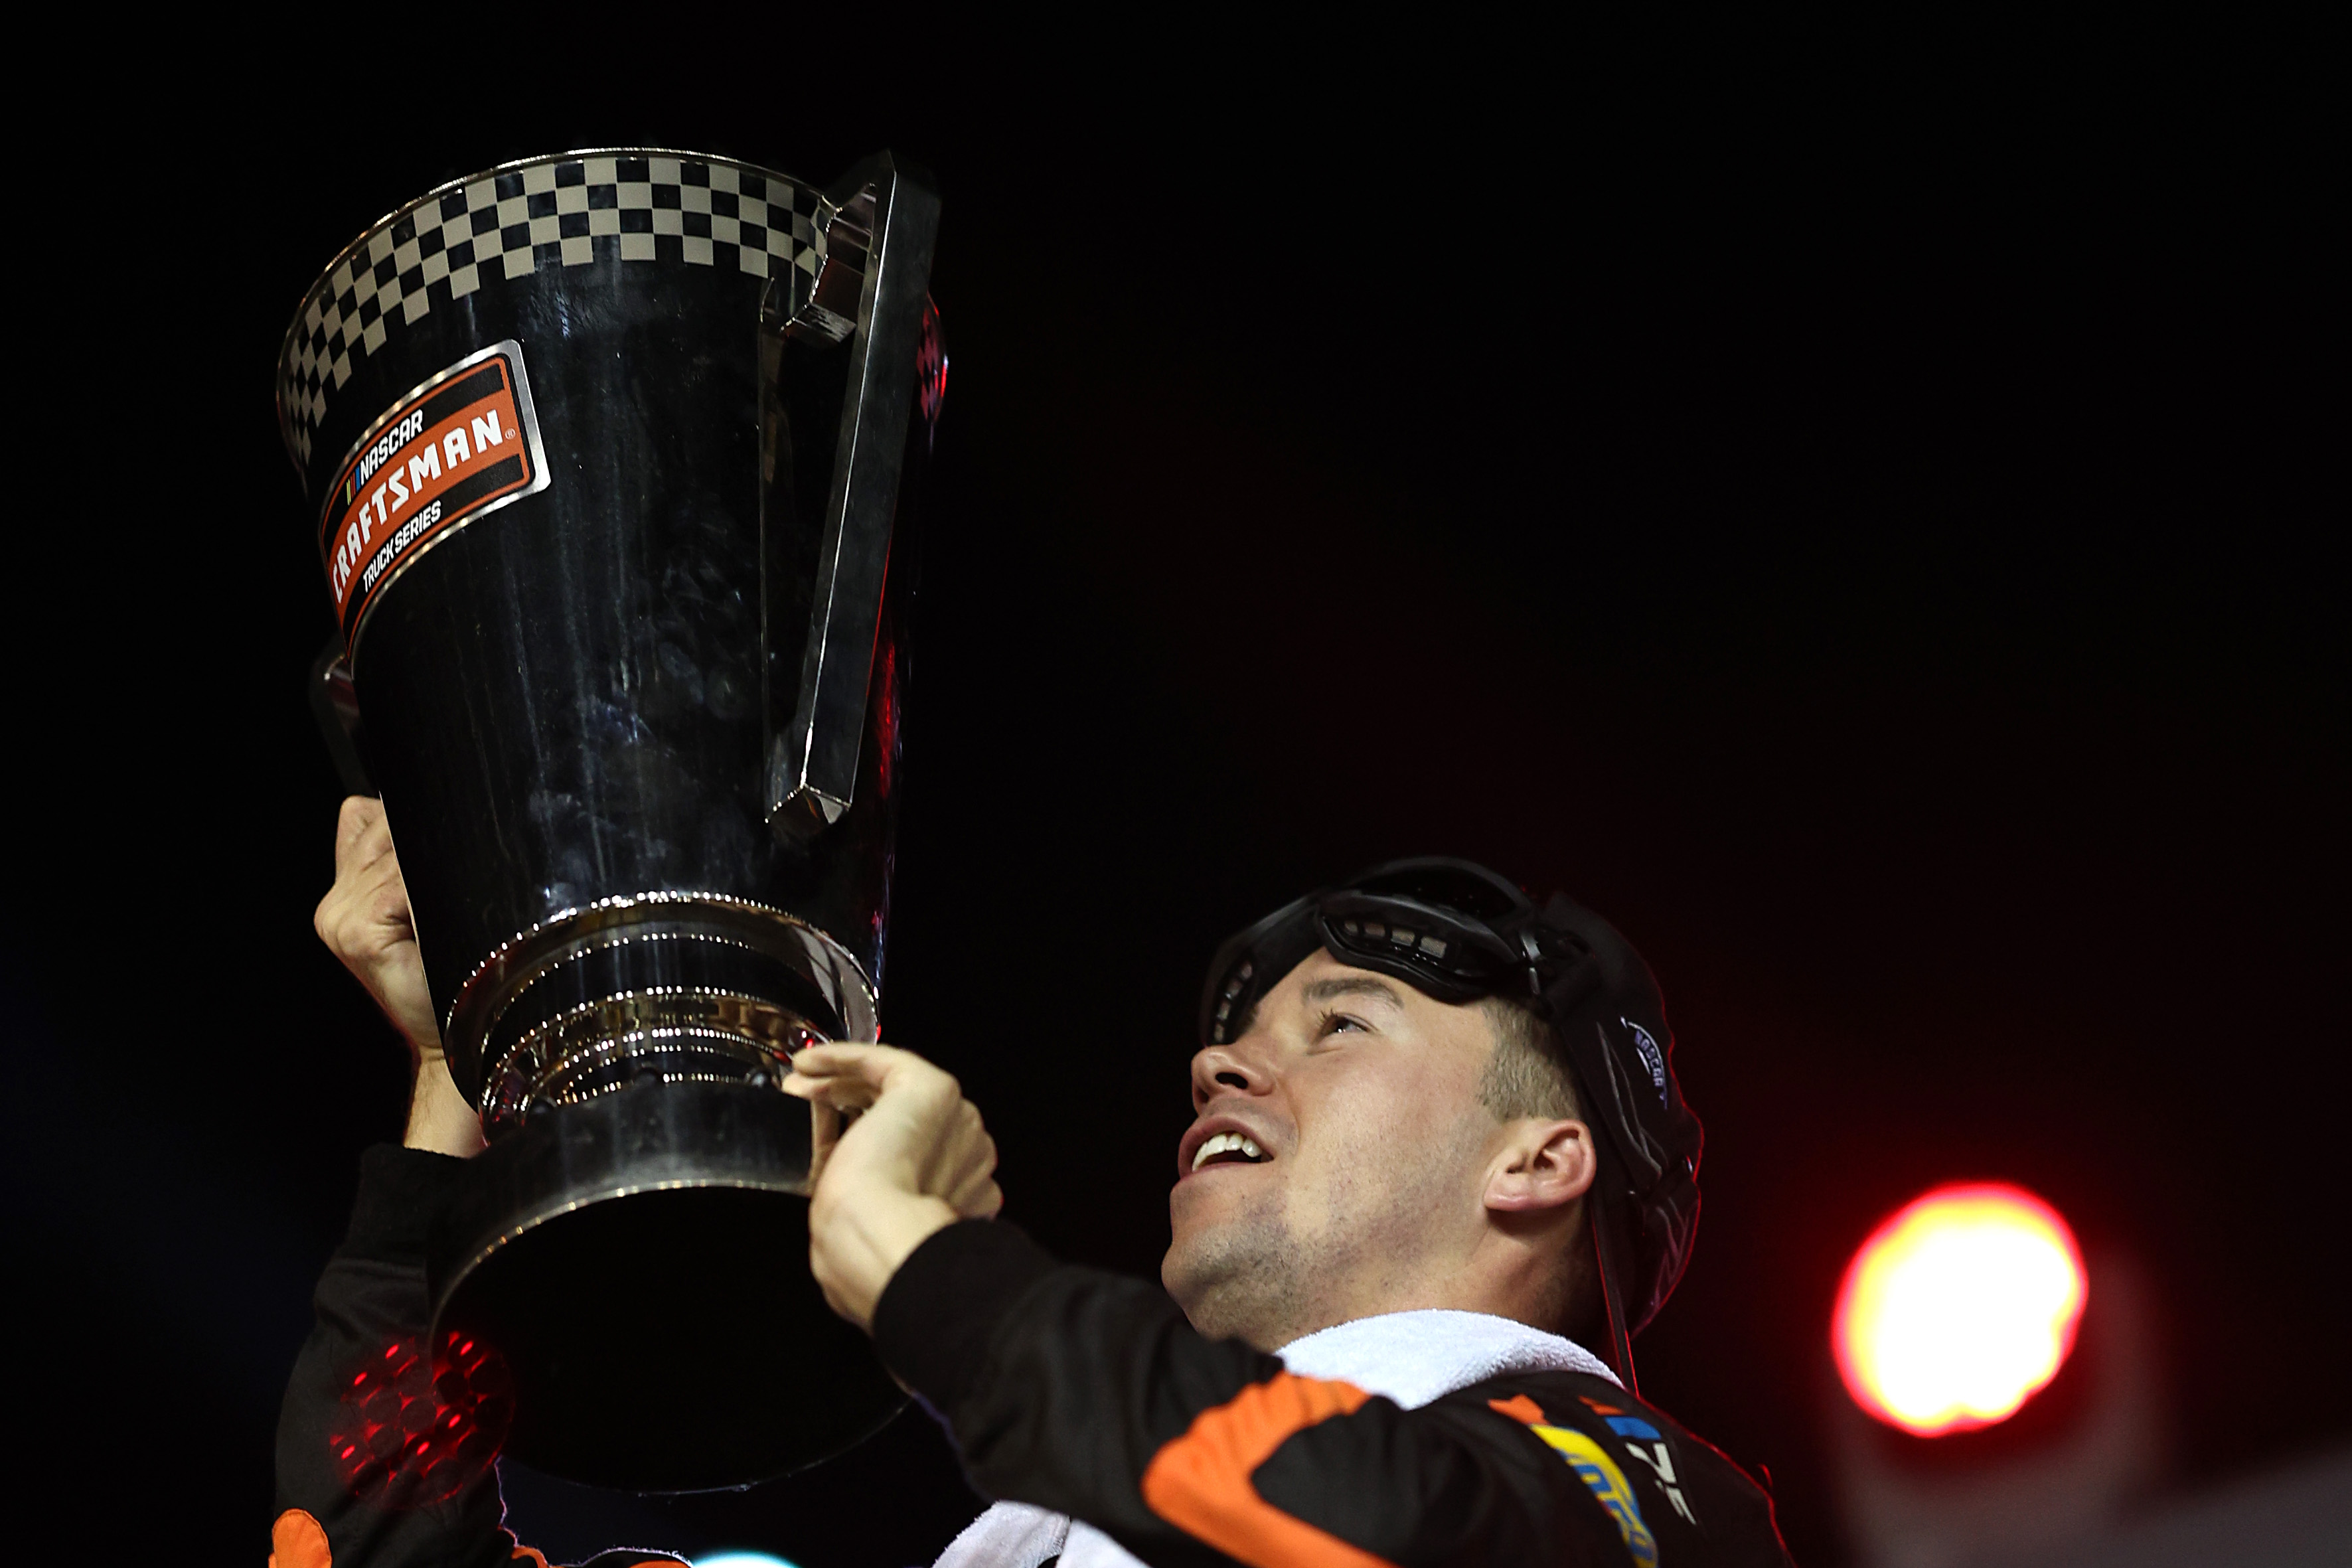 Ben Rhodes celebrates his second NASCAR Trucks championship in three years in Friday's season finale at Phoenix Raceway.(Photo by Jared C. Tilton/Getty Images)